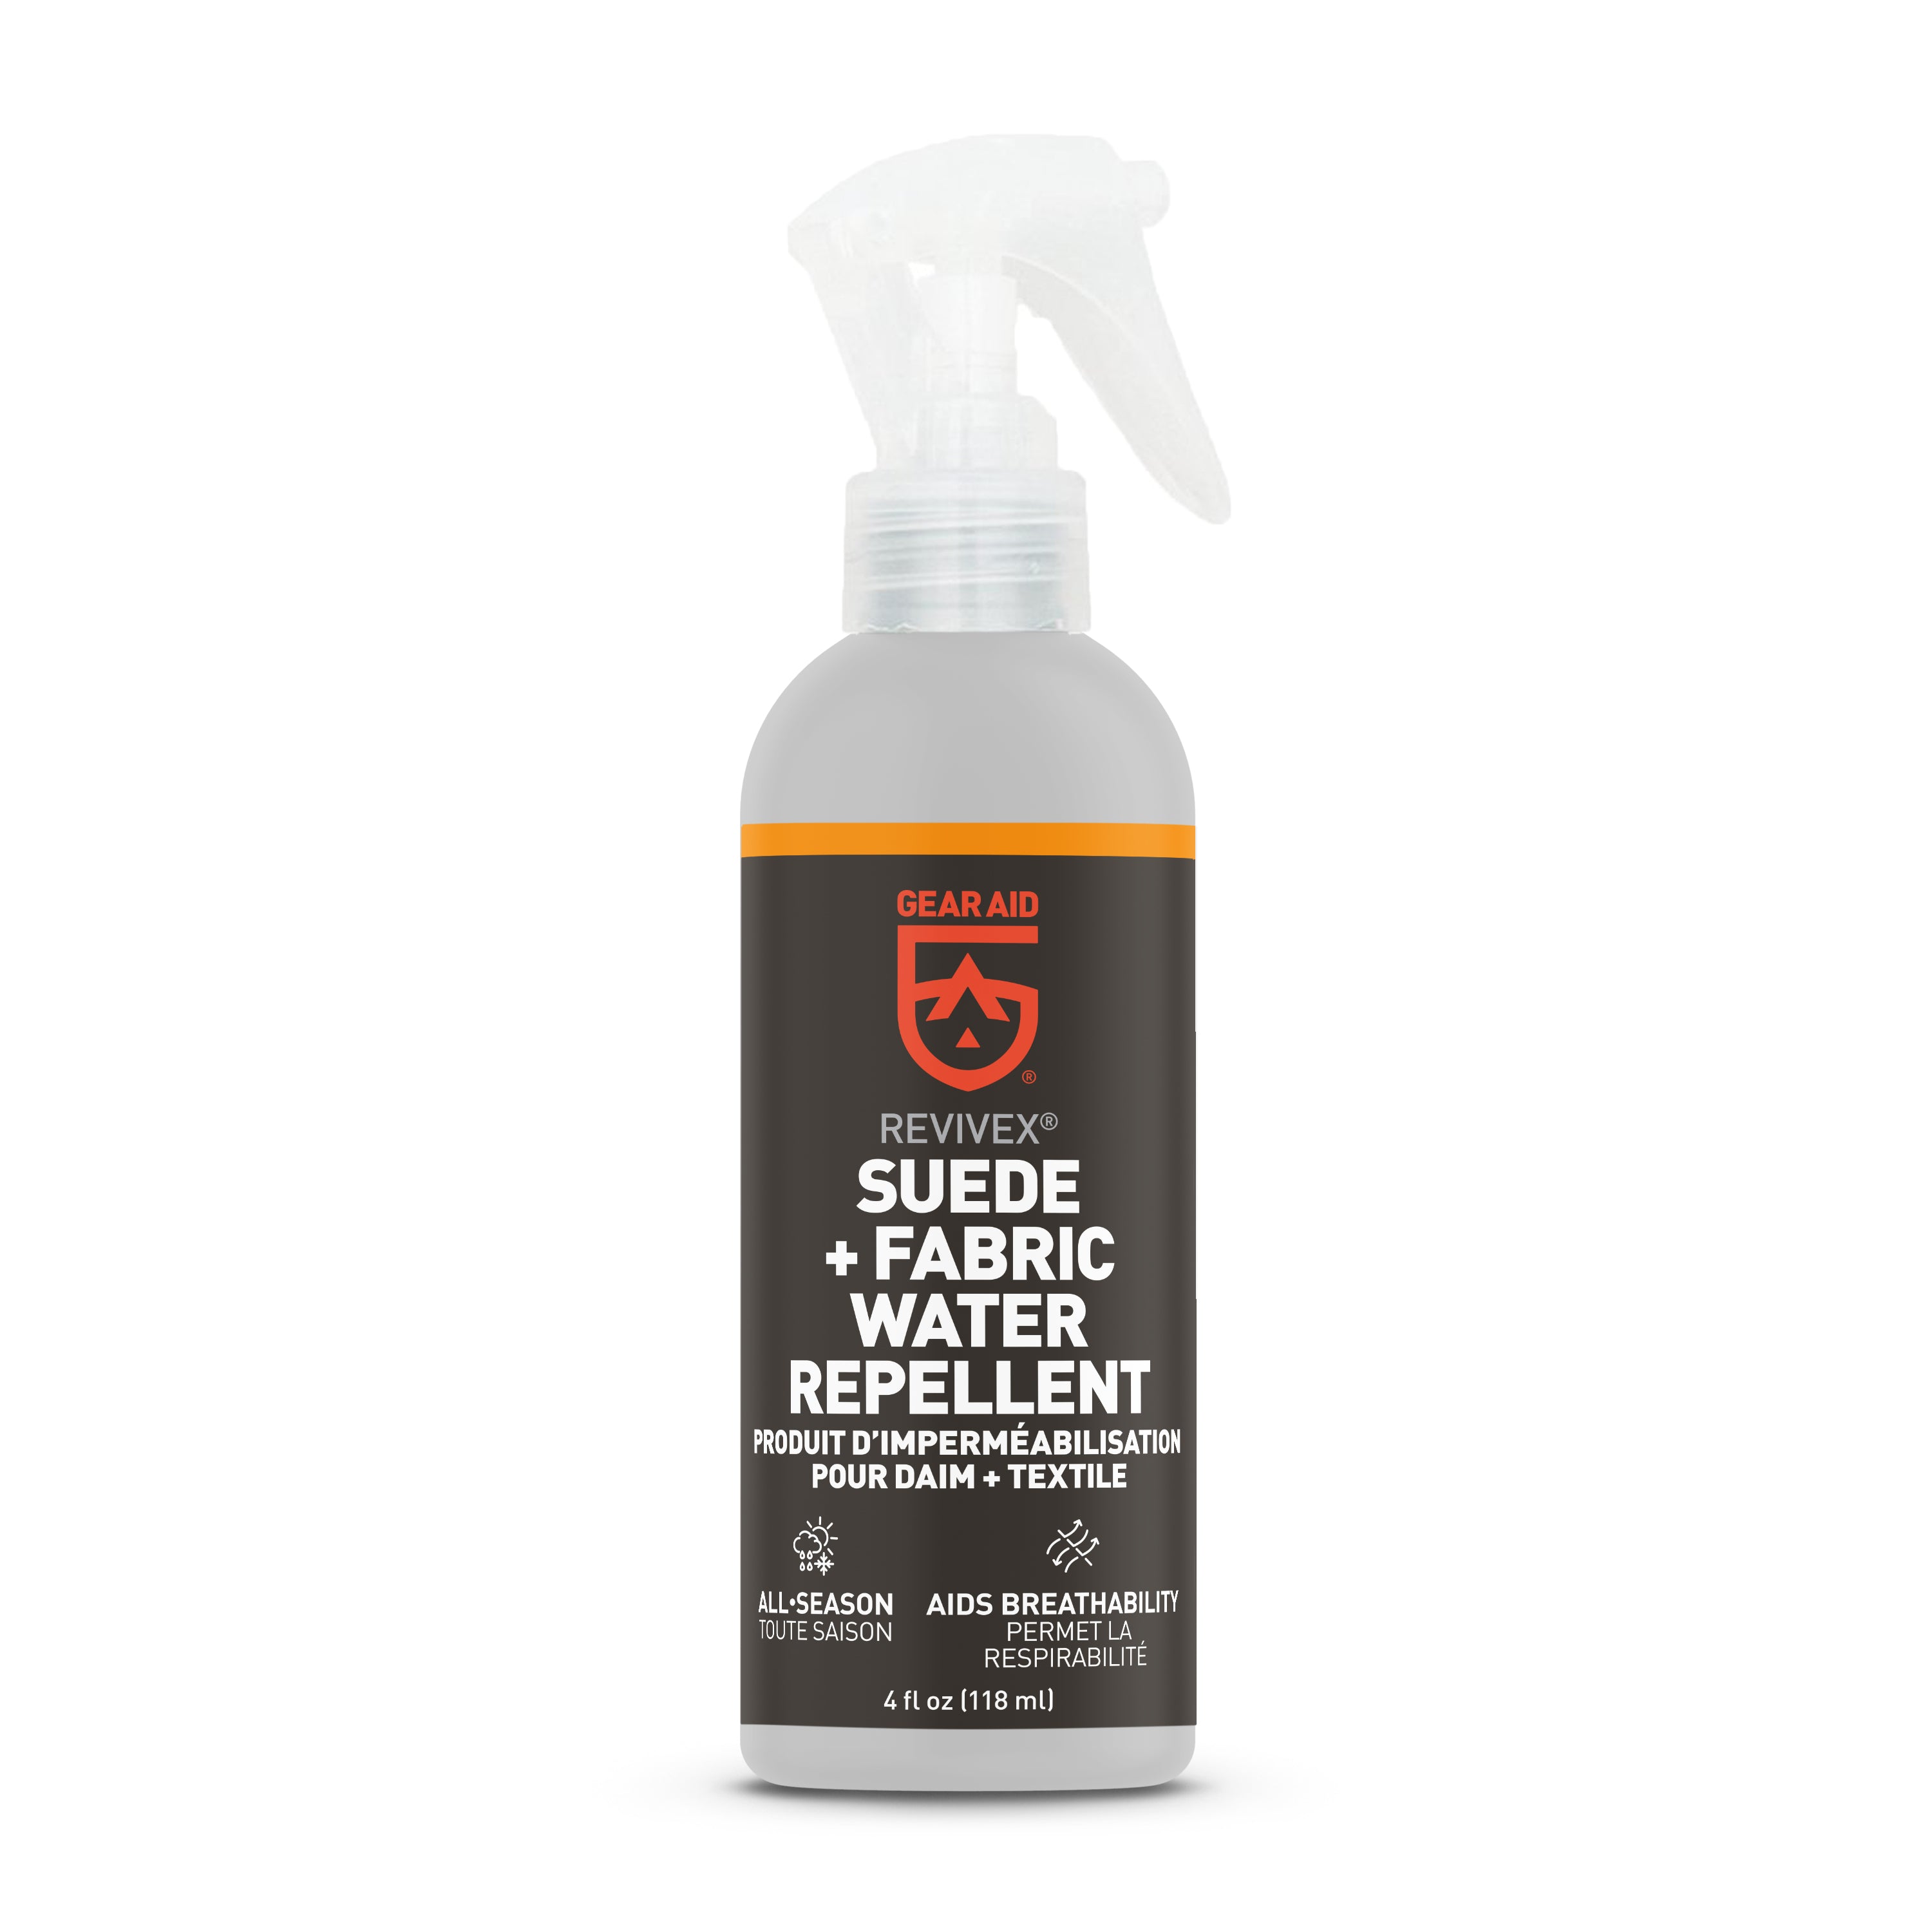 water repellent for suede shoes